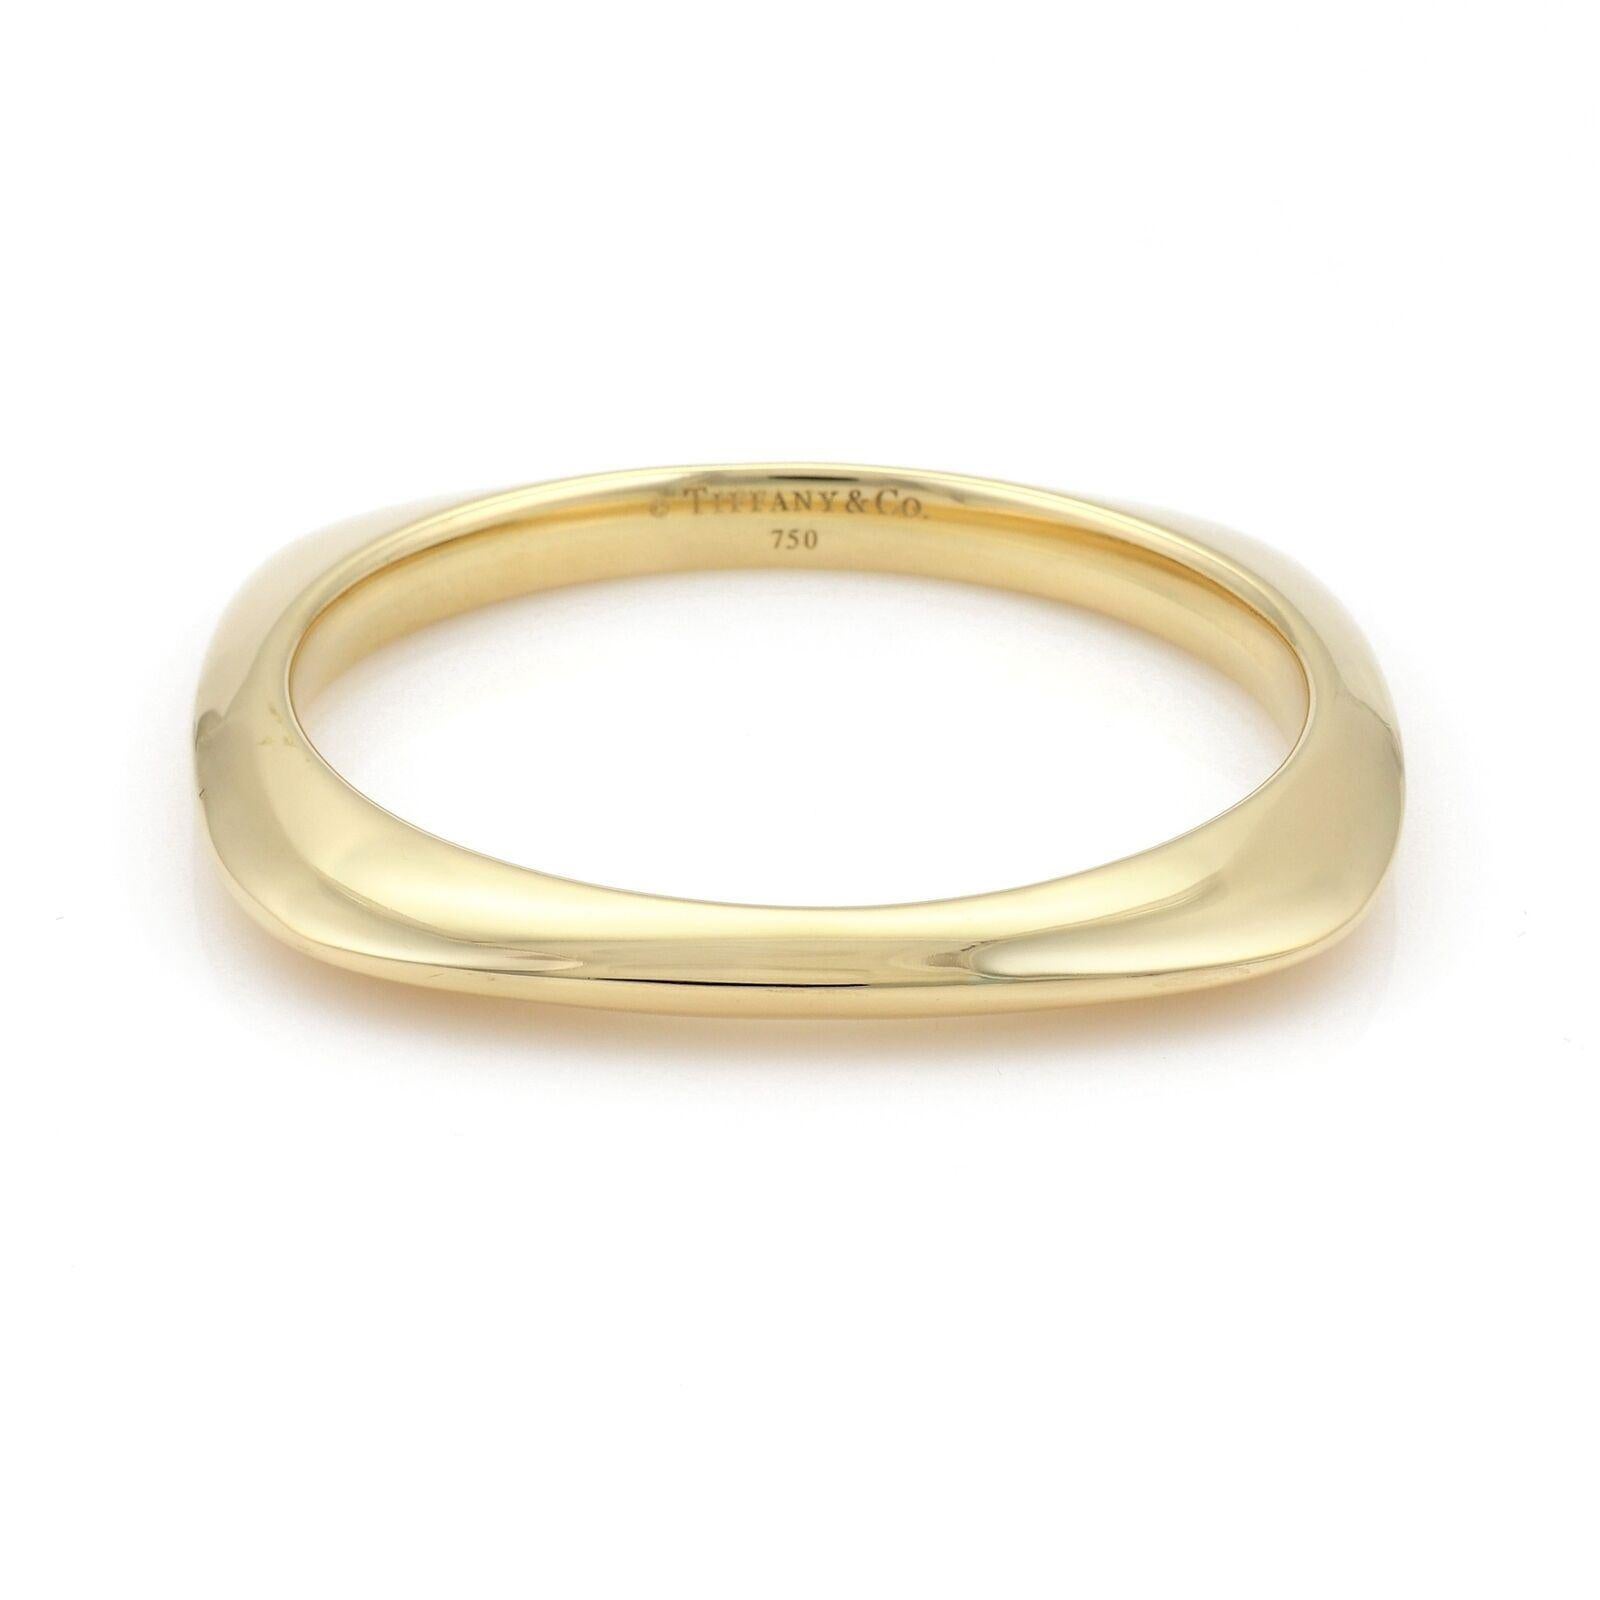 This gorgeous authentic bangle is from Tiffany & Co. It is crafted from 18k yellow gold with a high polished finish featuring a cushion shape frame with the round shape inside for an easier wear. It is signed by the designer with the metal content.